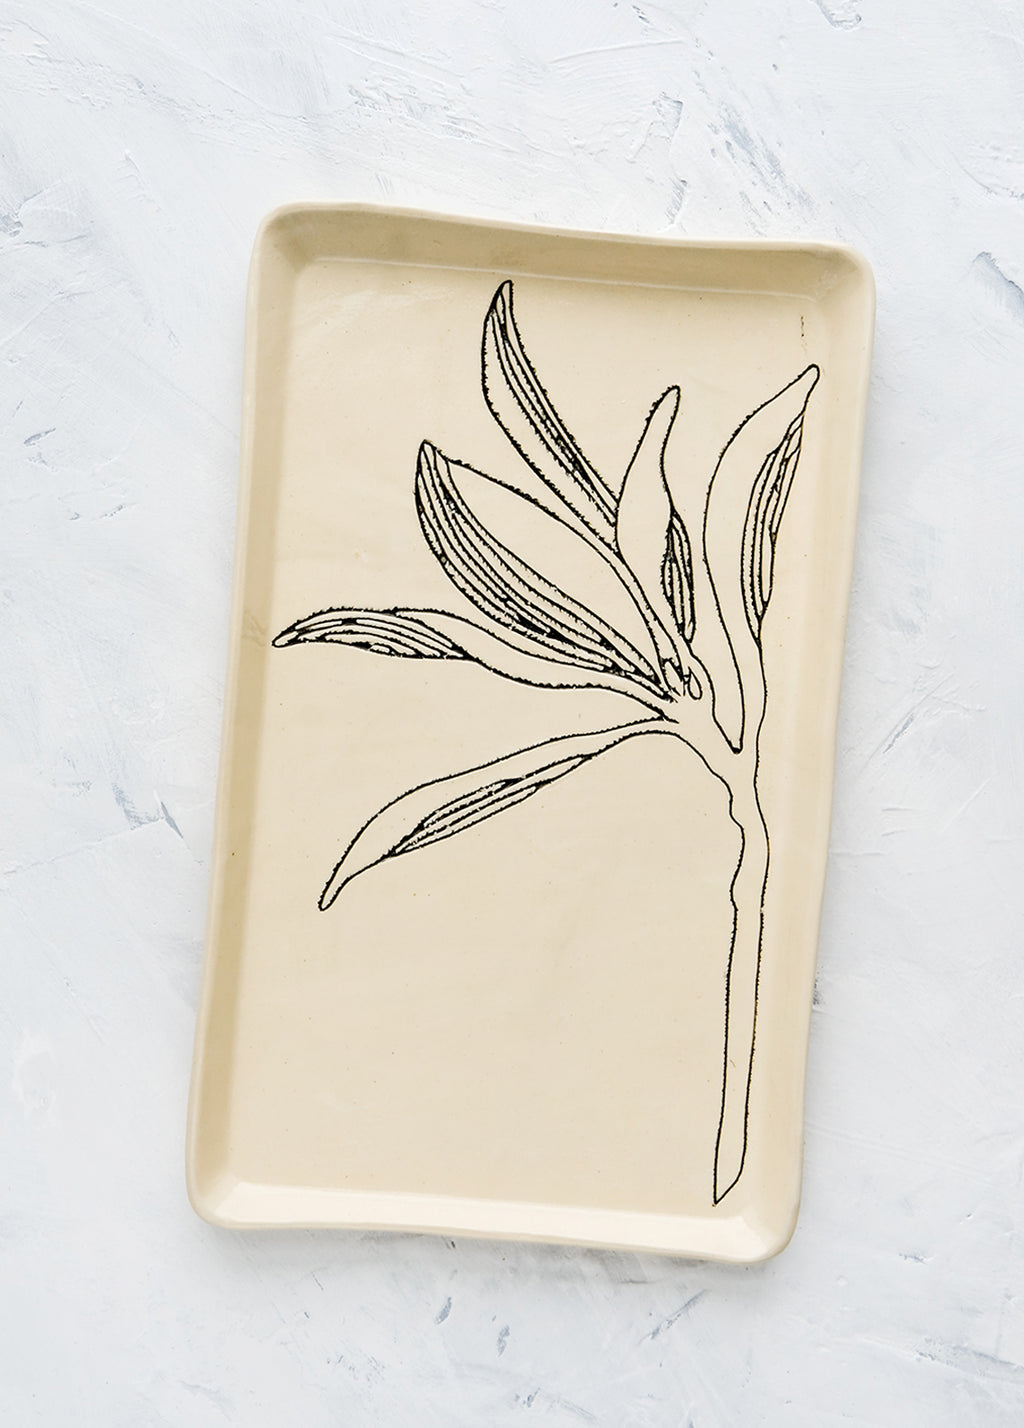 Magnolia: A rectangular ceramic tray in natural bisque color with an etched black drawing of a Magnolia branch.